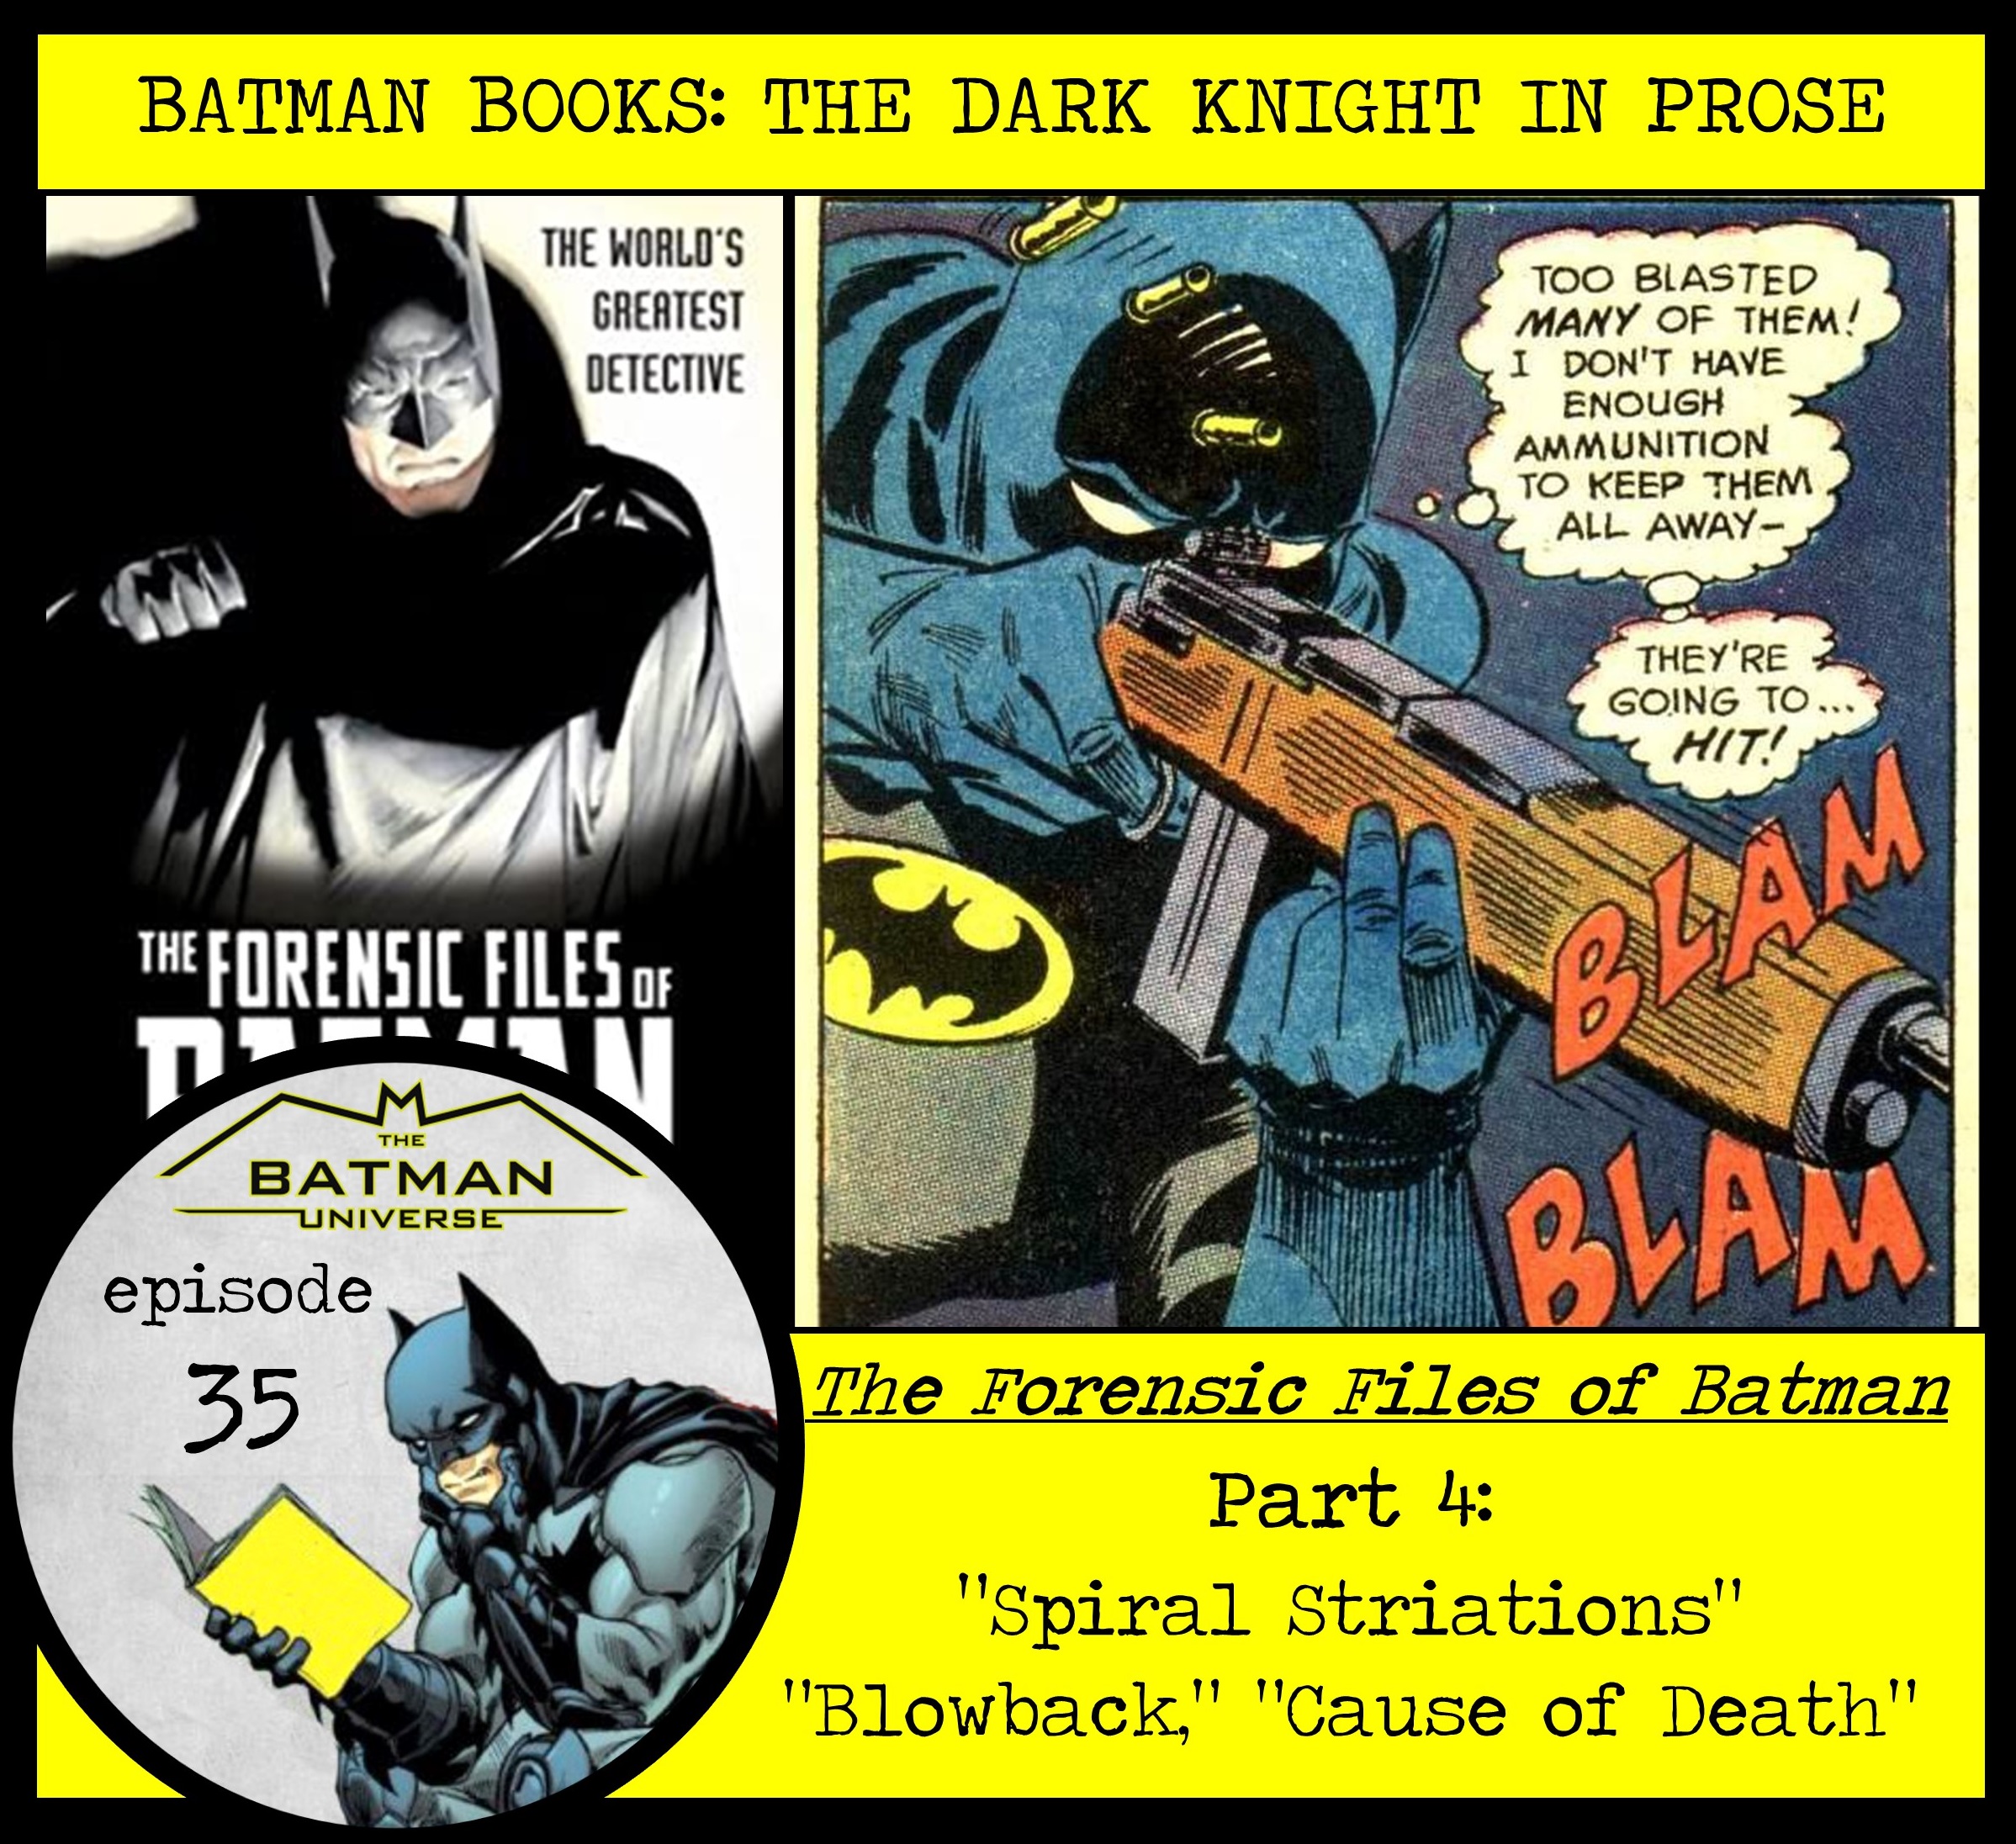 The Forensic Files of Batman Part 4